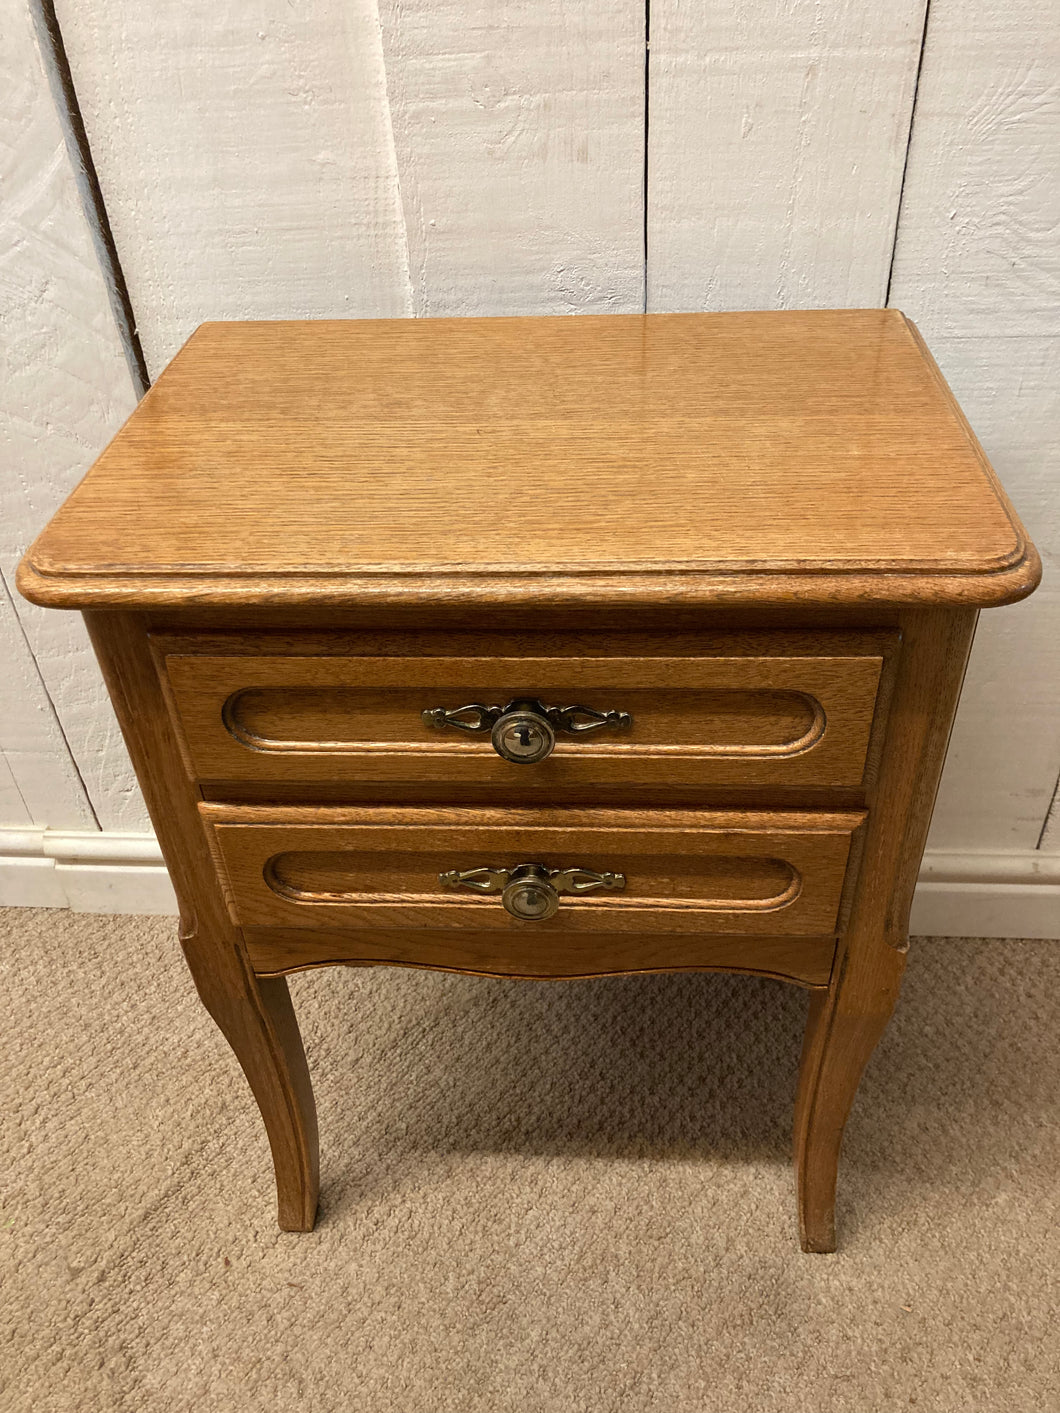 Small Oak Table With Two Drawers Bedside Table Lamp Table